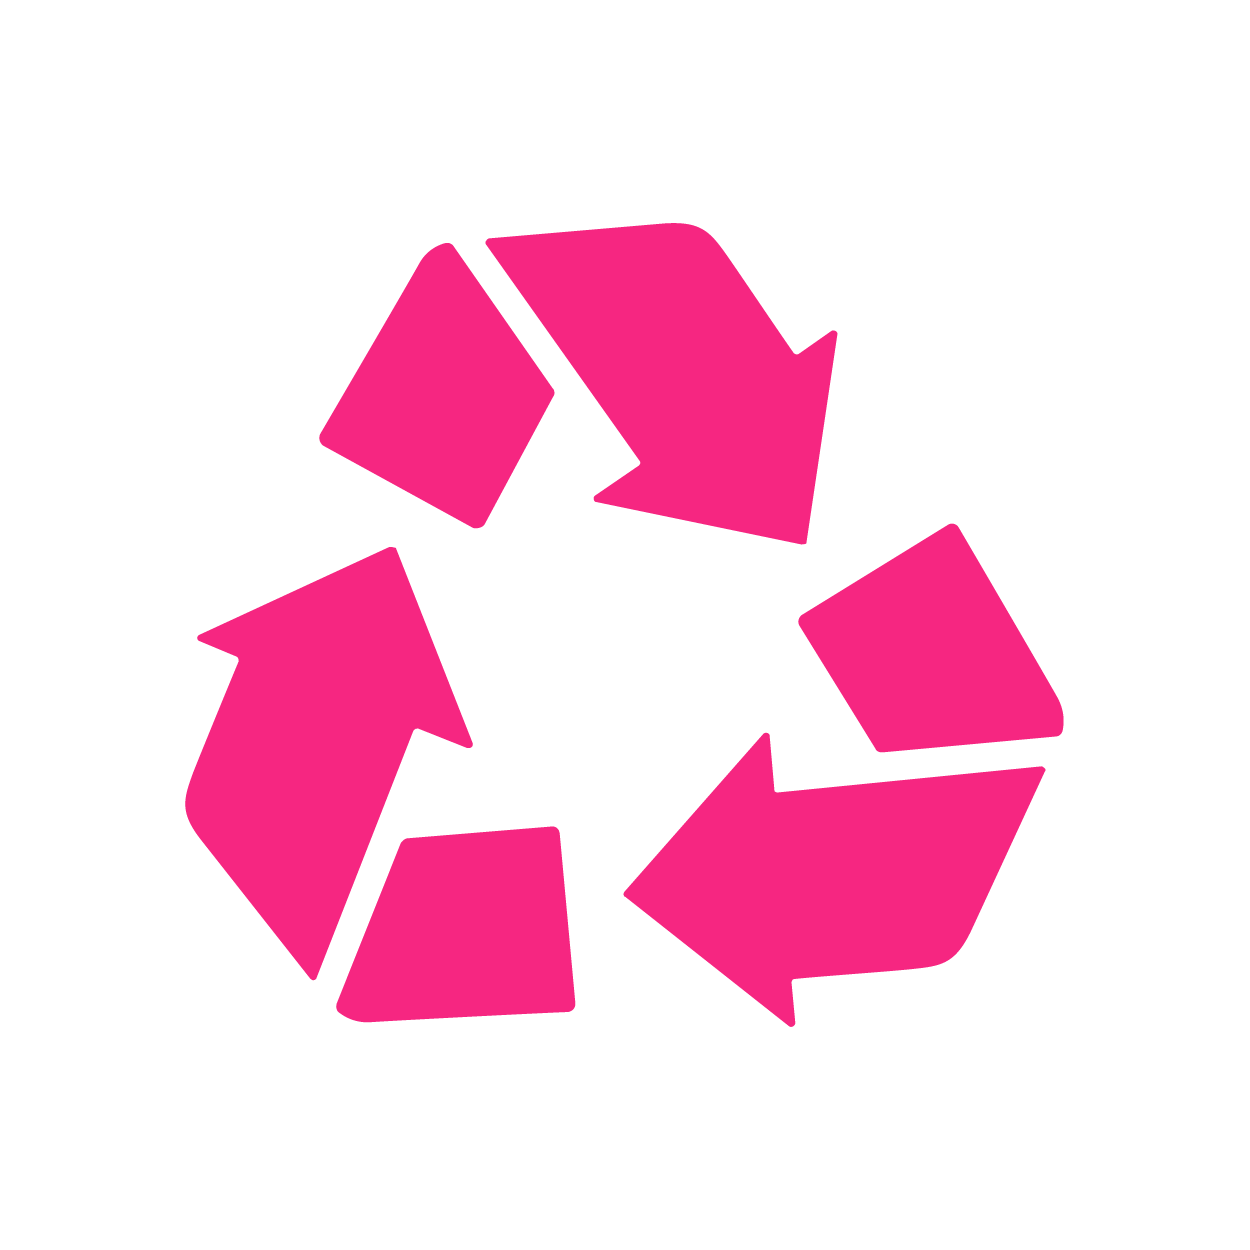 Cleantech PR, sustainable PR and renewables PR represented by a pink reduce, re-use, recycle logo